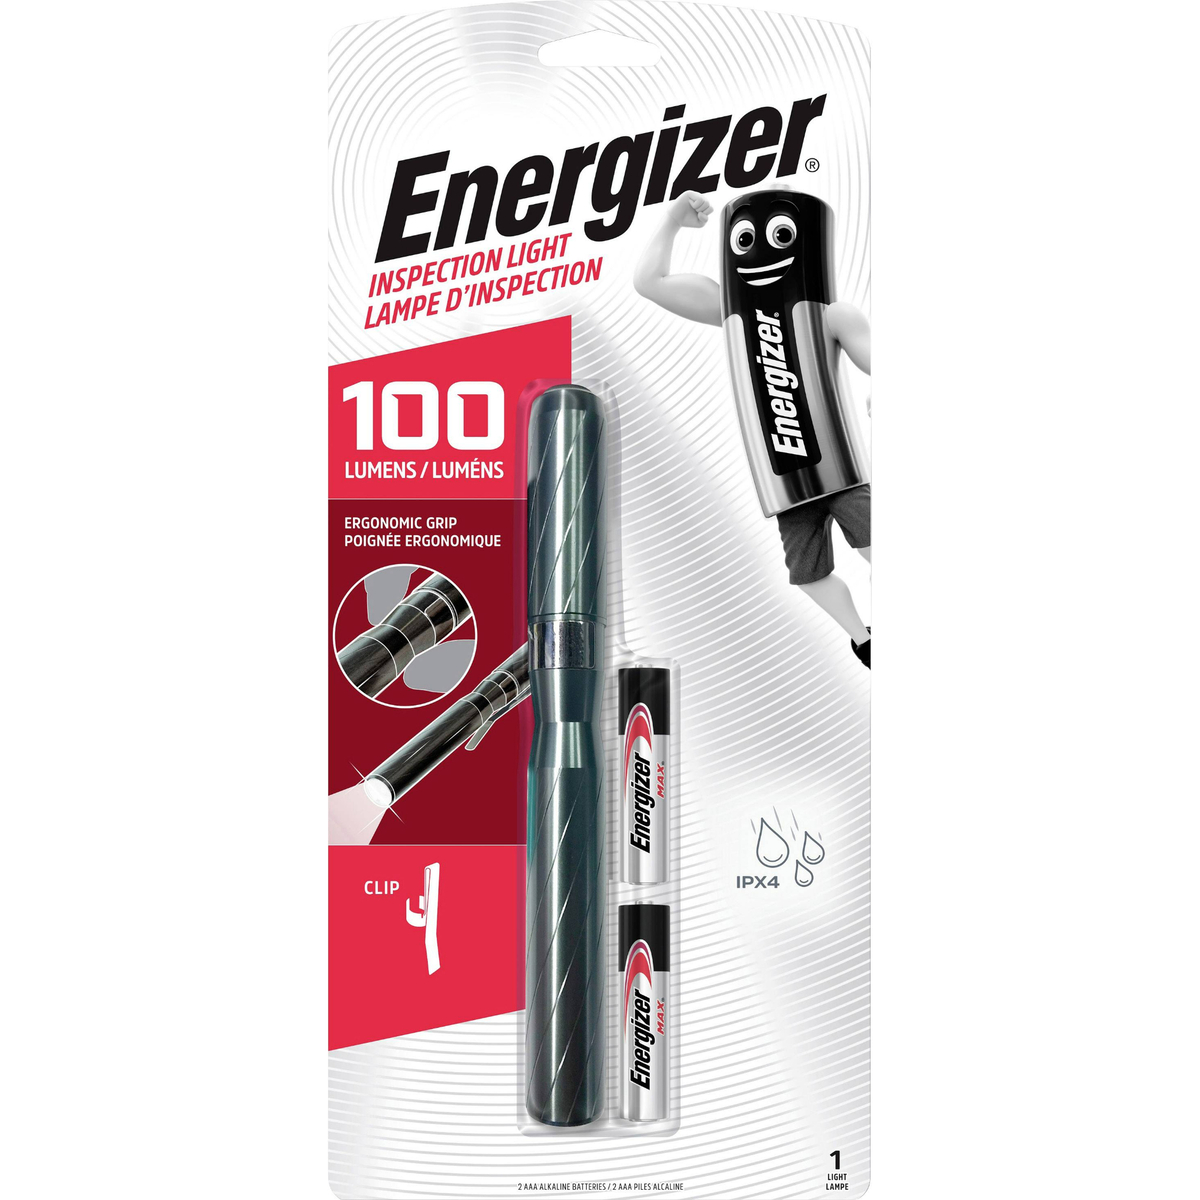 Energizer 100 lumens LED Inspection Light with 2 AAA Batteries, PMHH22